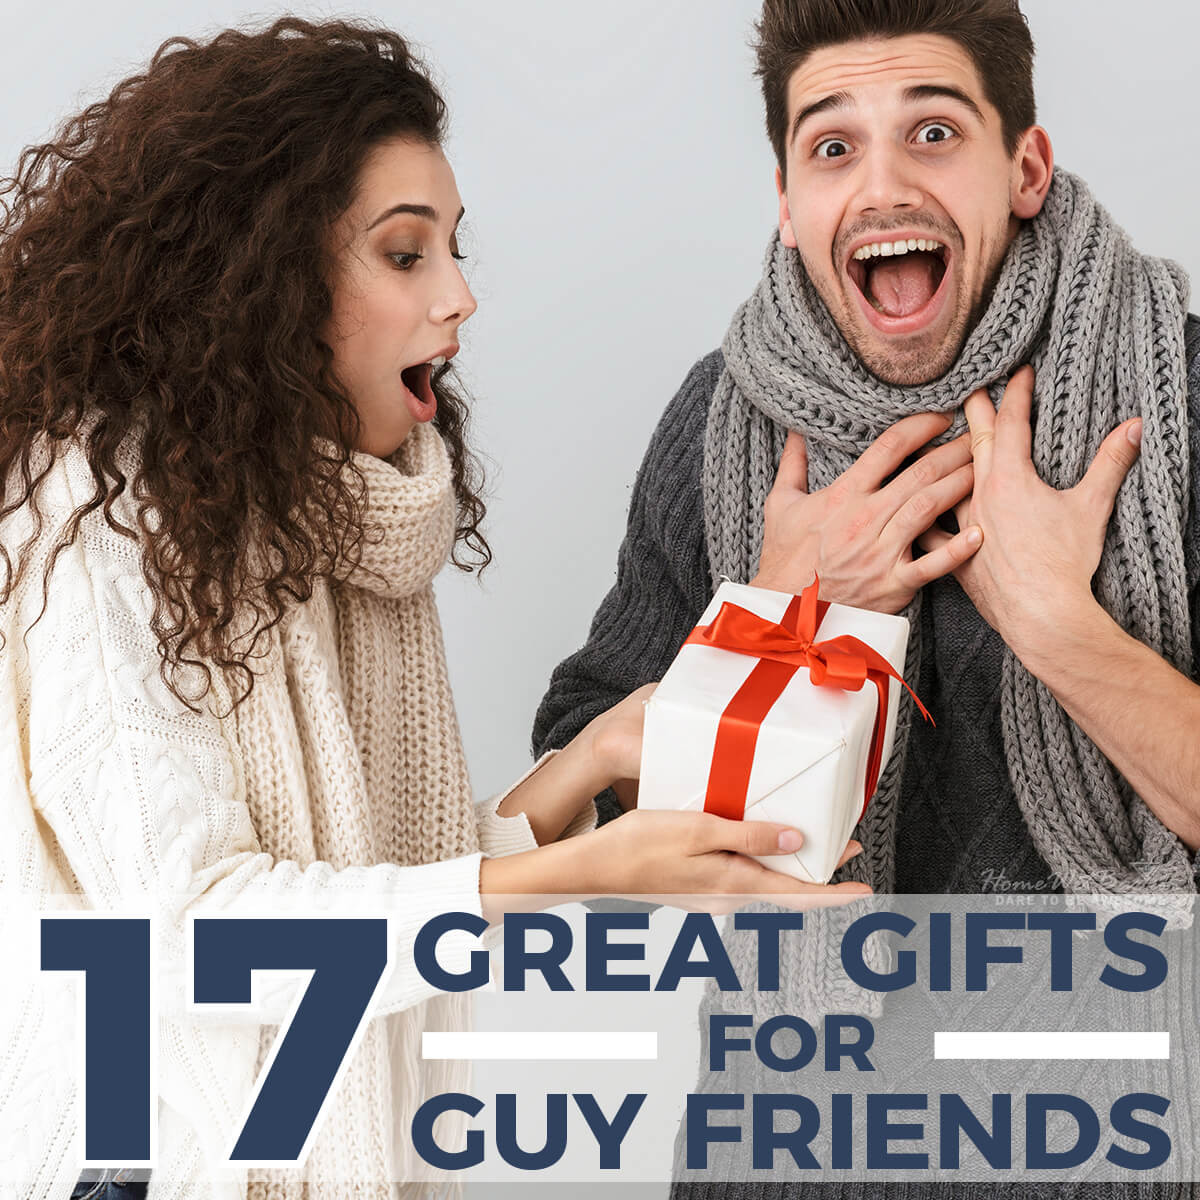 Gift Ideas For Best Friend Male
 17 Great Gifts for Guy Friends